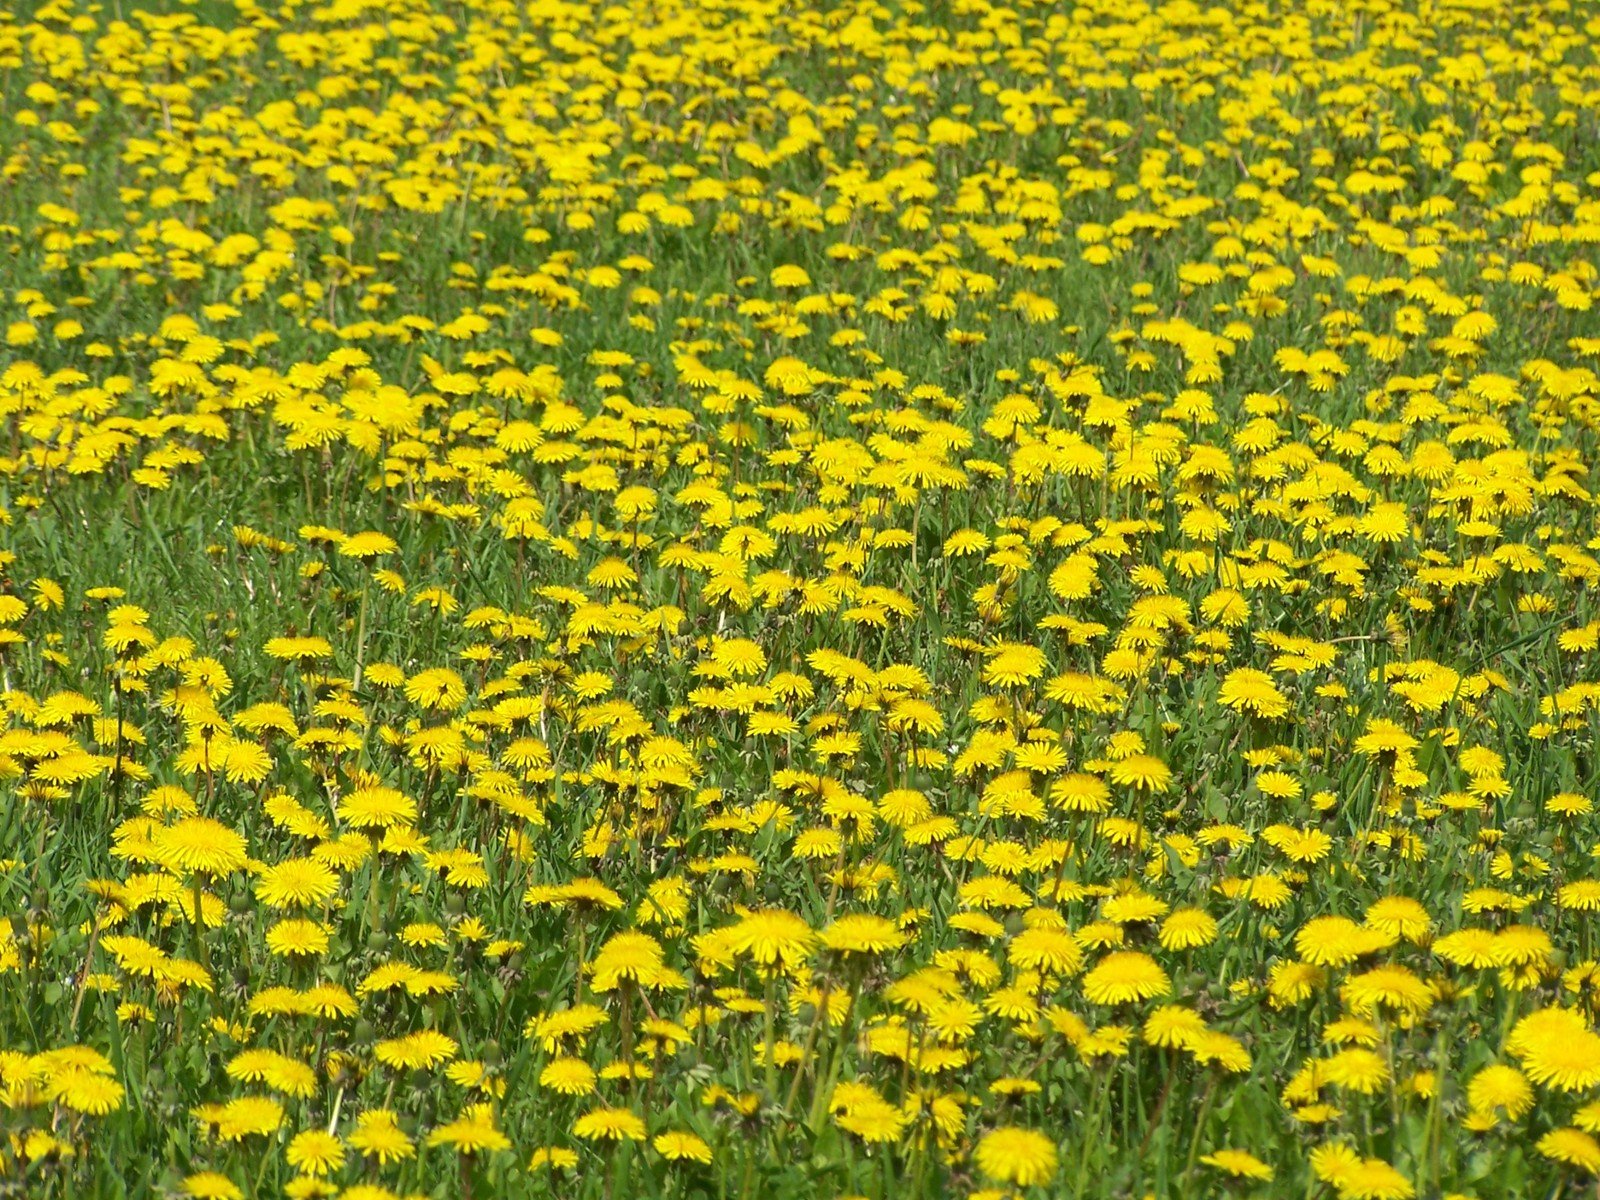 yellow flowers in the grass with very tall grass